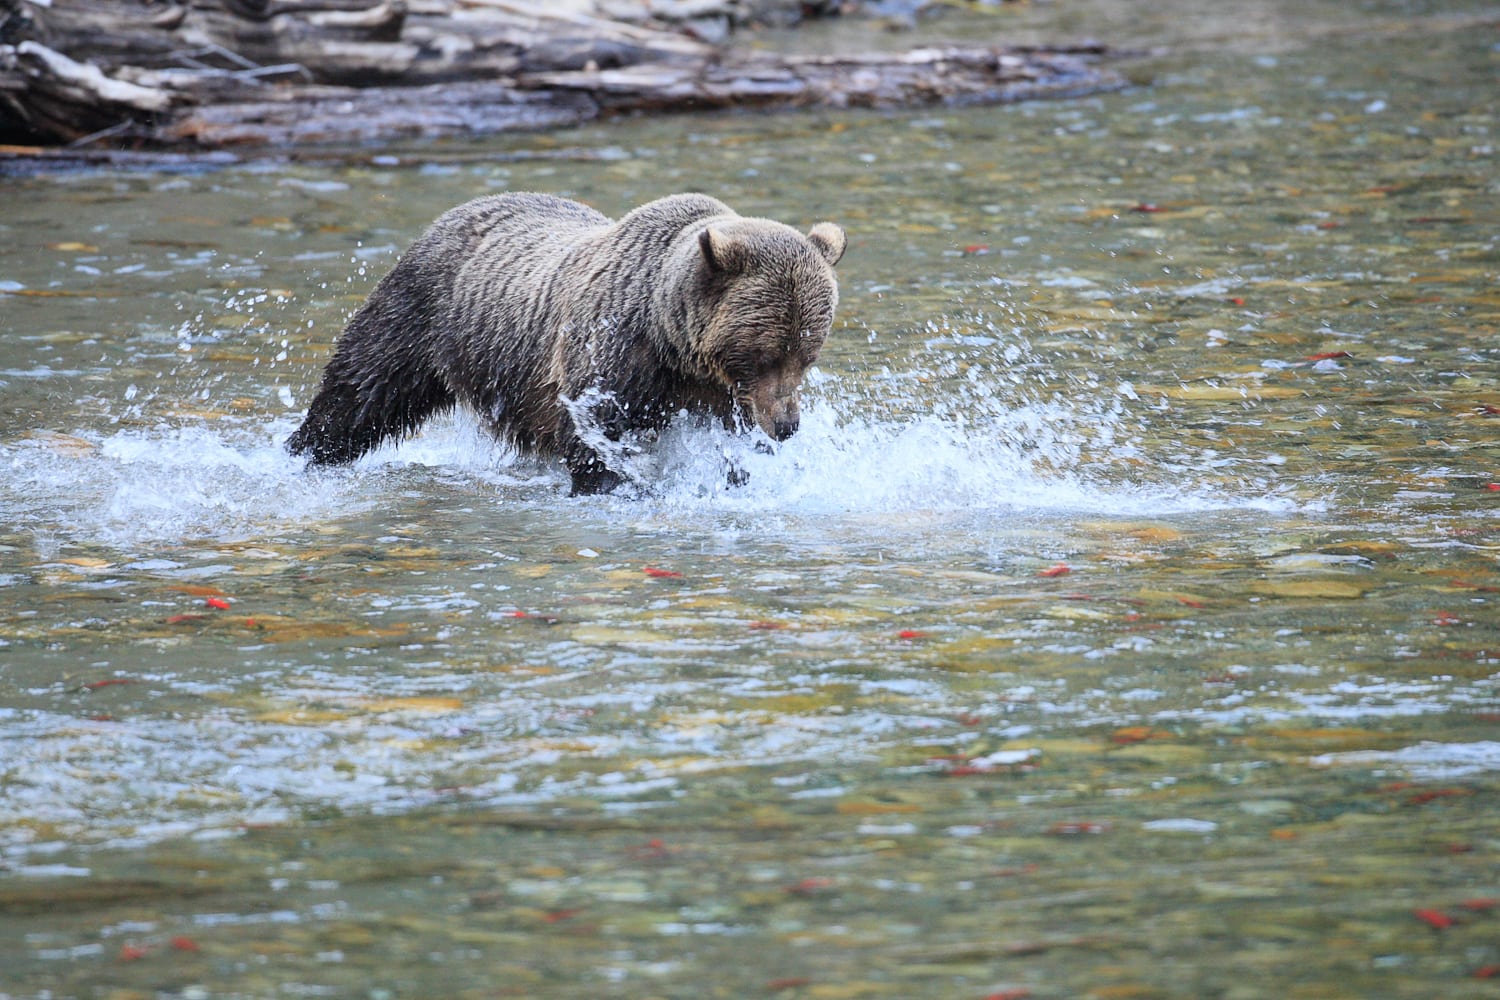 A grizzly bear fishing at Wild Bear Lodge